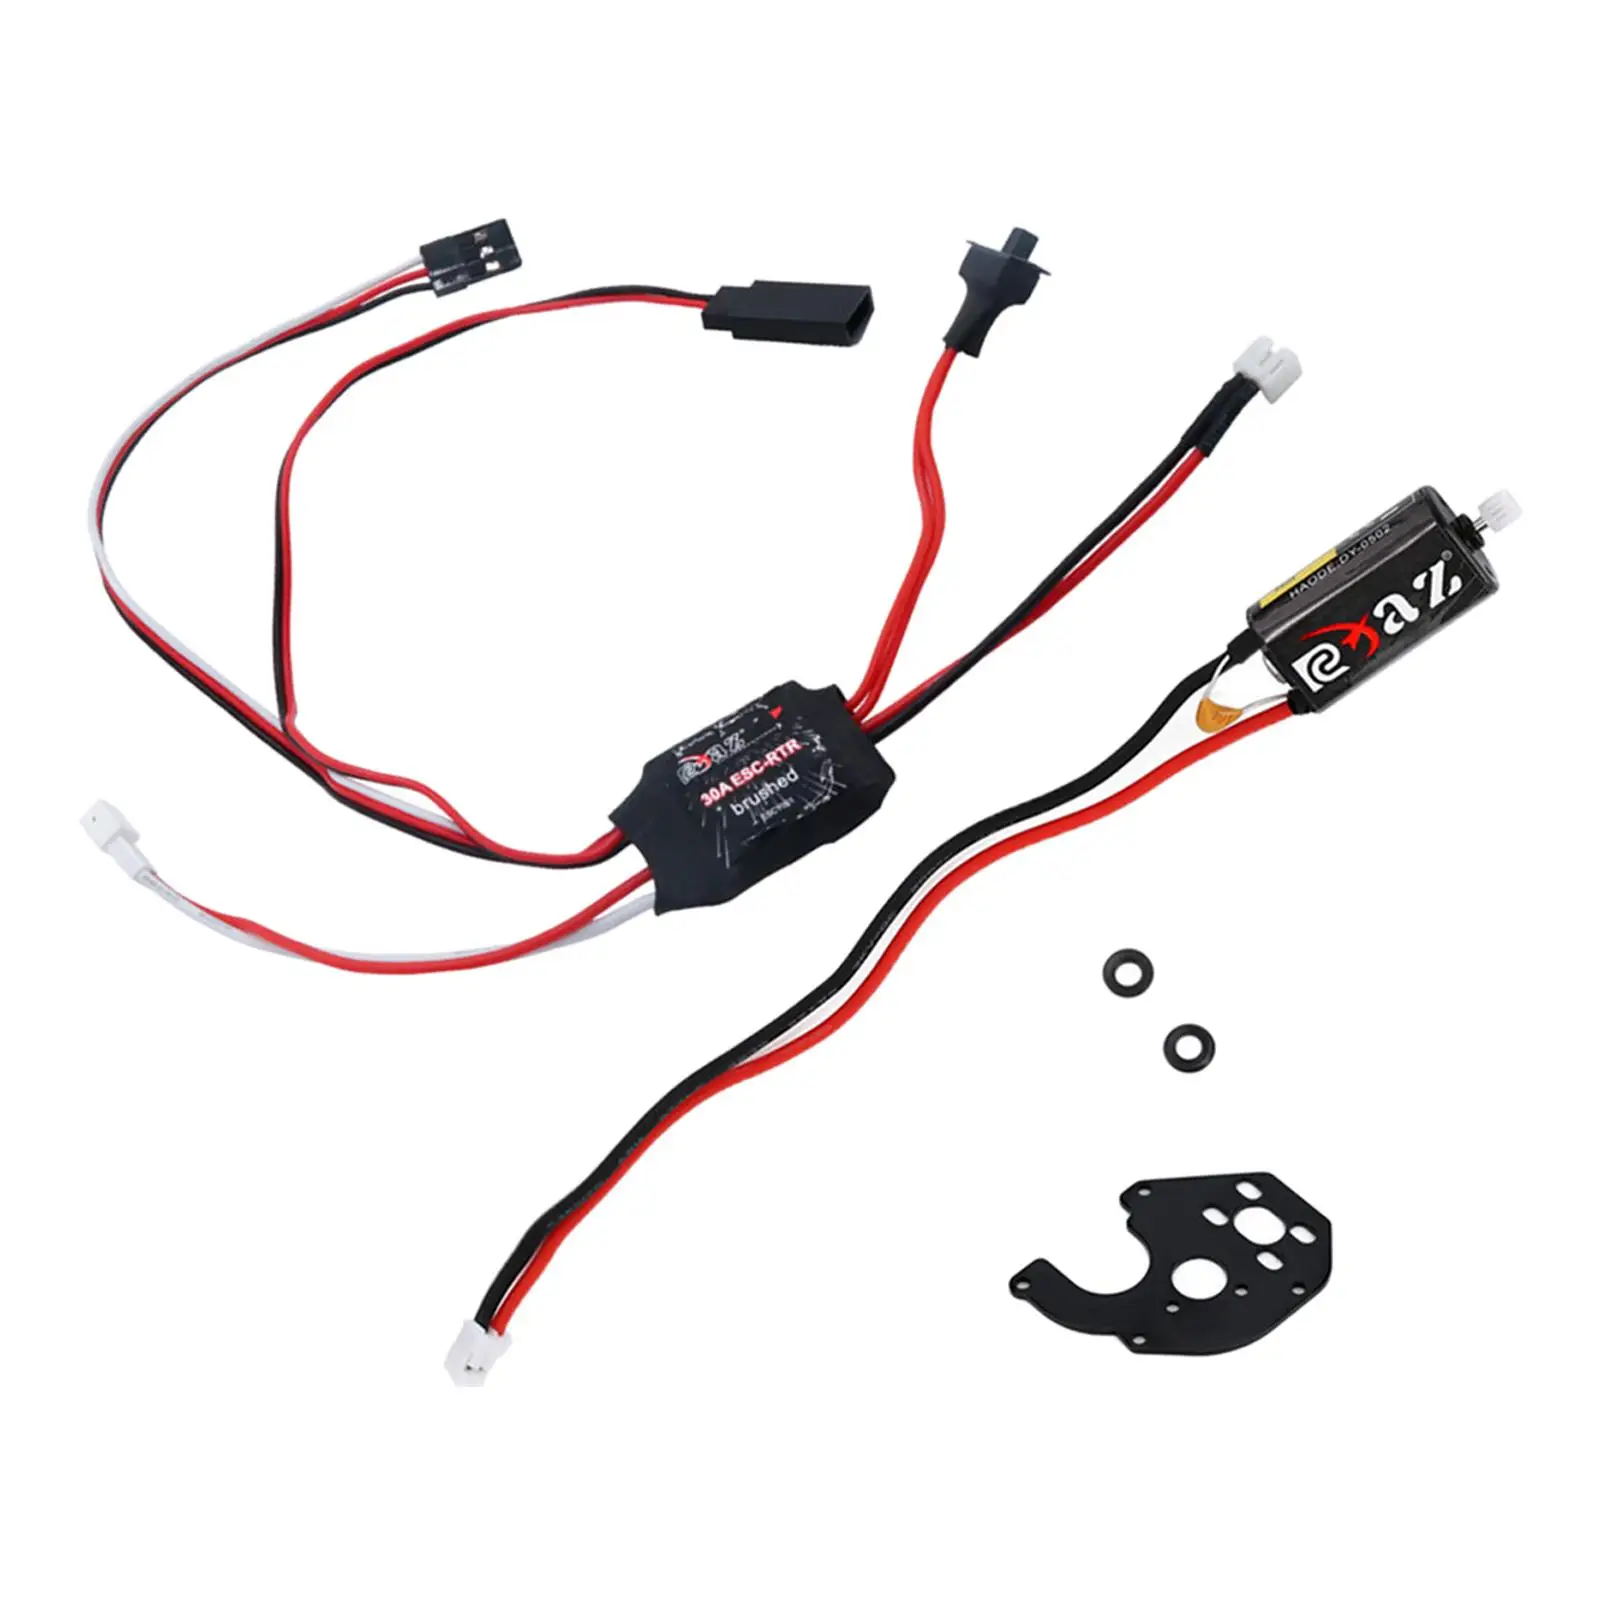 1:24 RC Car 050 Motor with 30A ESC for Axial SCX24 Axi90081 DIY Accessory RC Hobby Car Vehicles Model Buggy